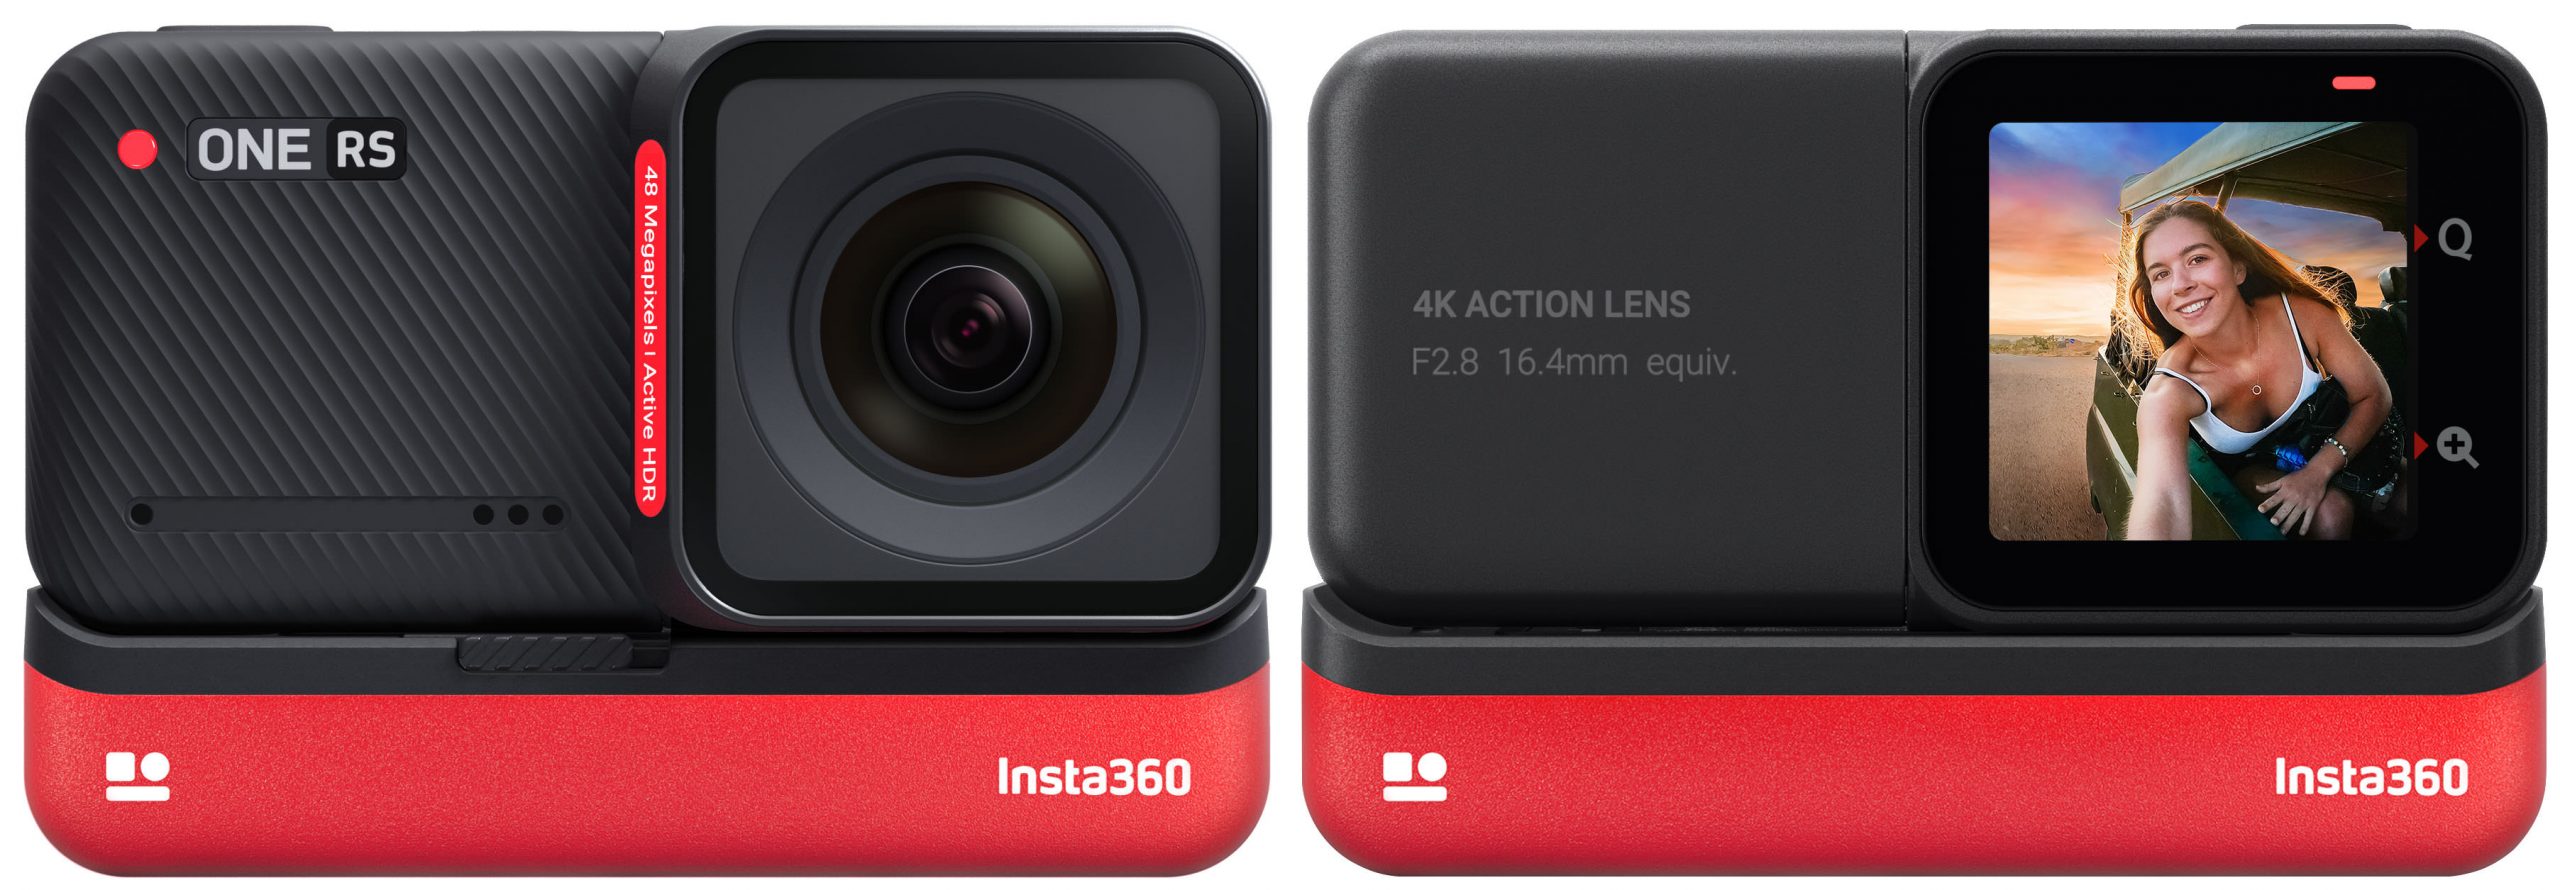 Insta360 ONE RS modular action camera announced with more powerful